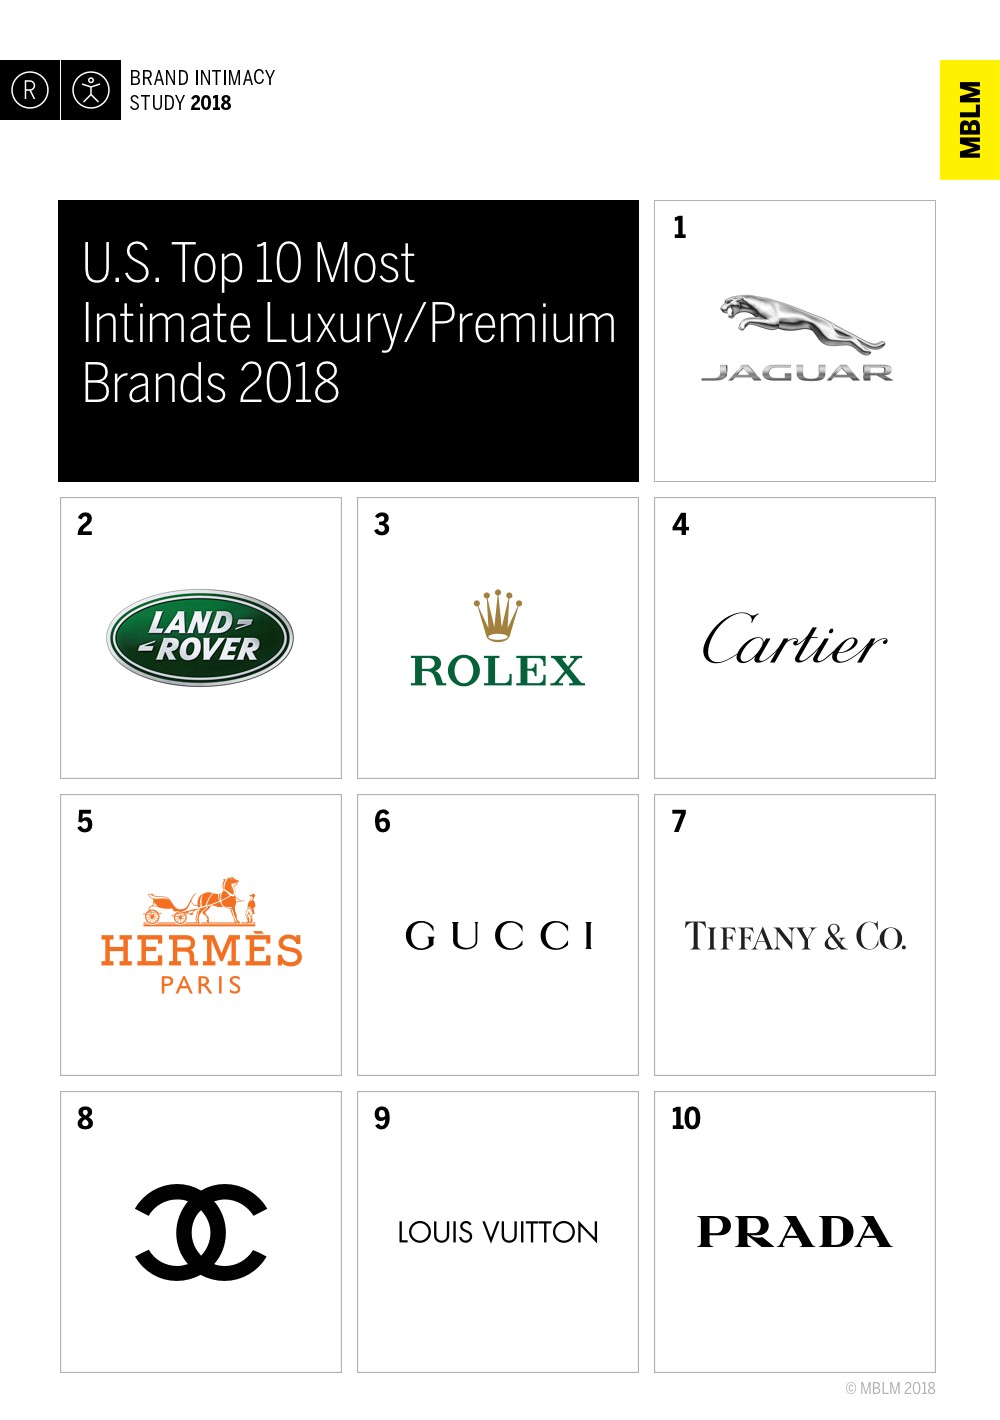 U.S. Top 10 Most Intimate Luxury Brands 2018 - It's A Glam Thing